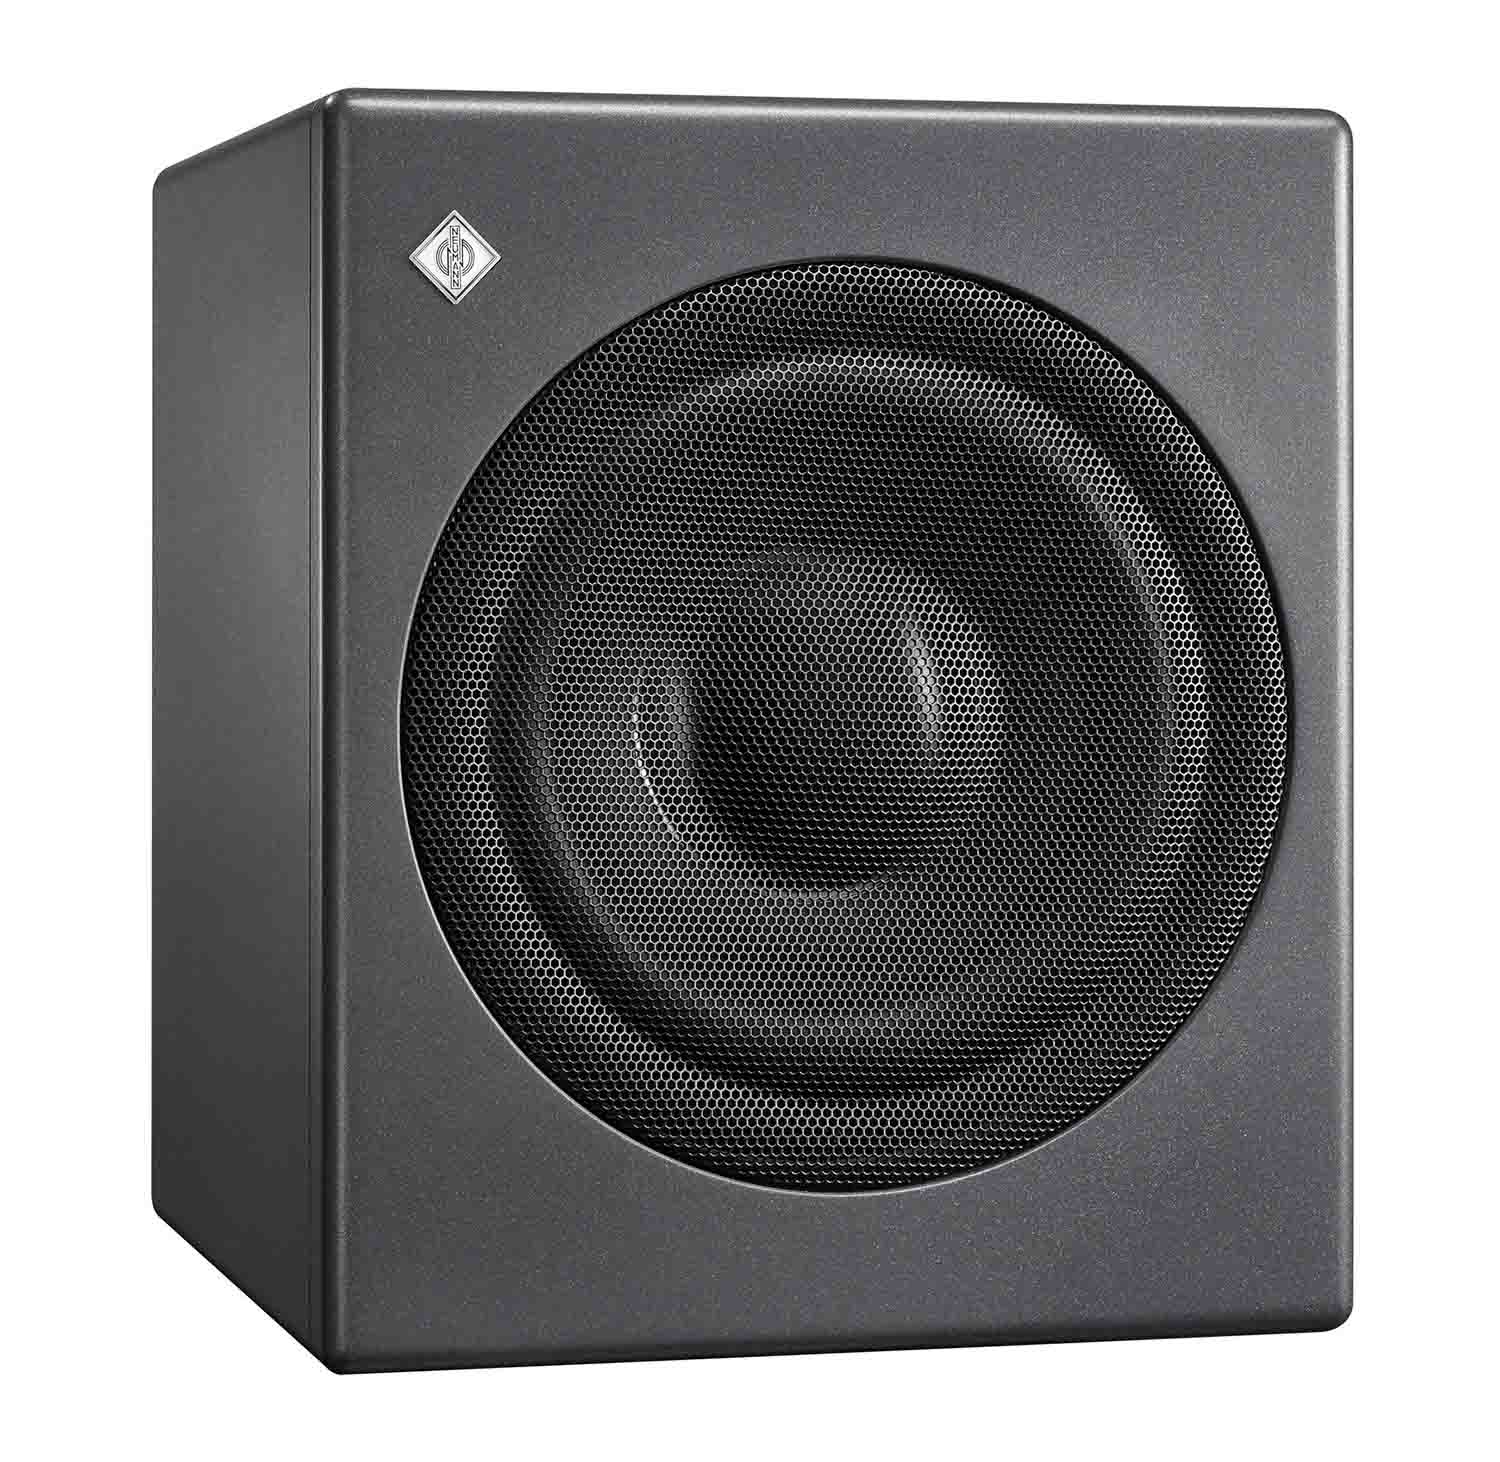 Neumann KH 750 Compact DSP-Controlled Closed-Cabinet Subwoofer - Hollywood DJ